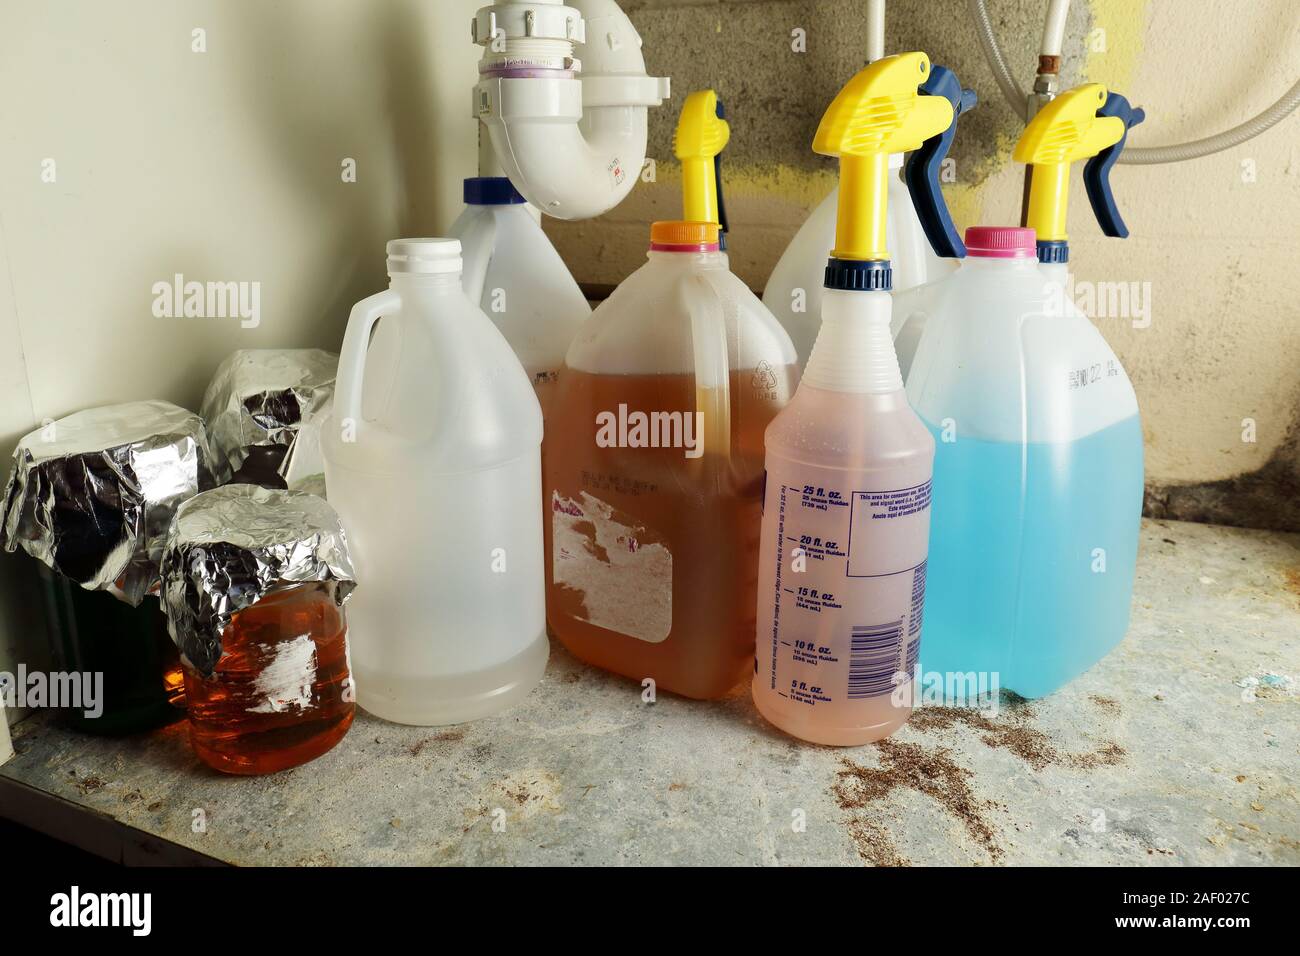 Variety in mysterious chemicals stored improperly in jugs, jars, and spray bottles under a sink Stock Photo